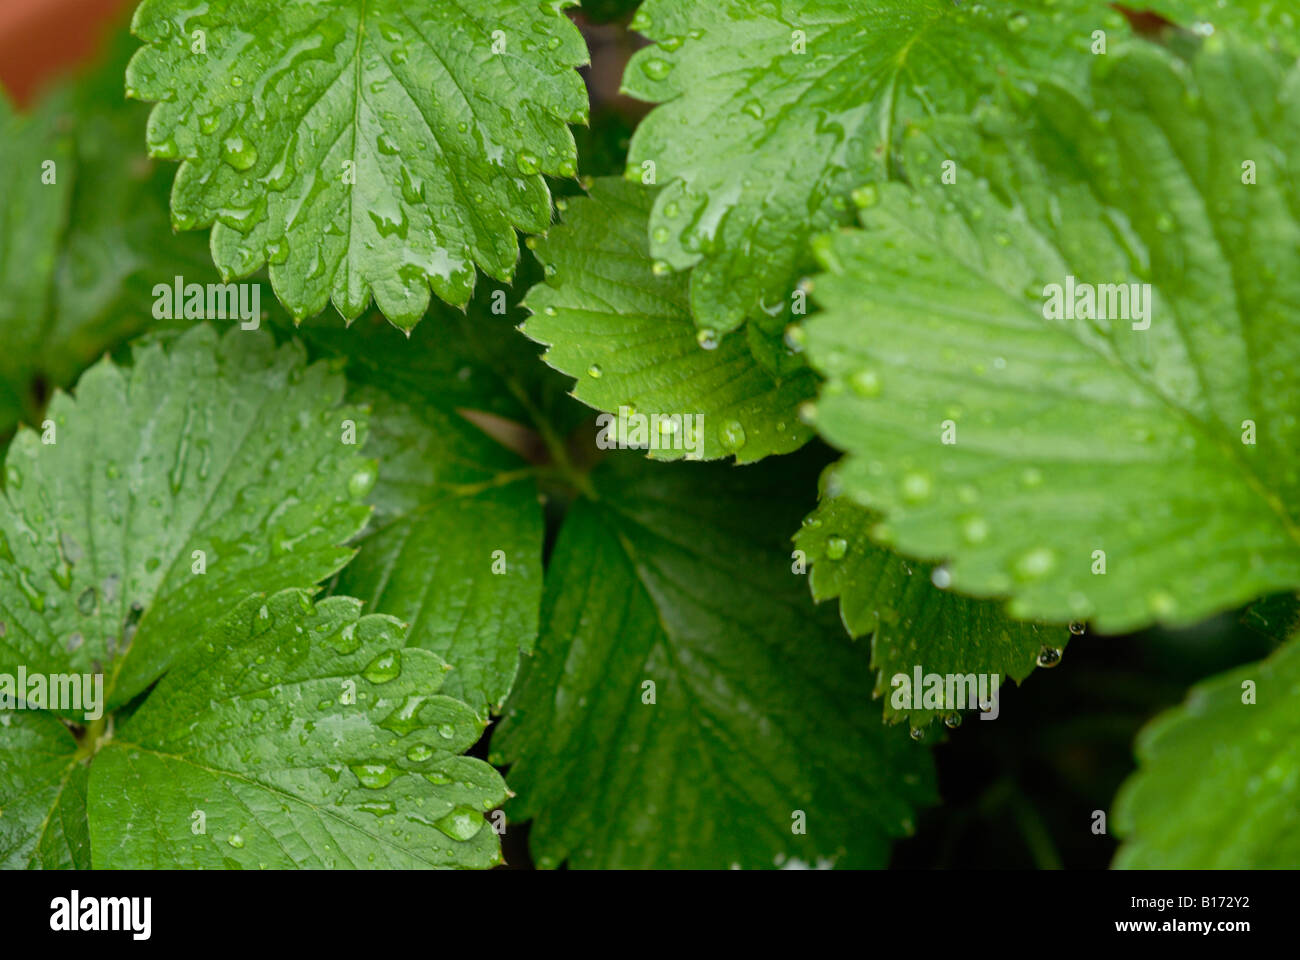 Wet strawberry leaves after a rain Stock Photo